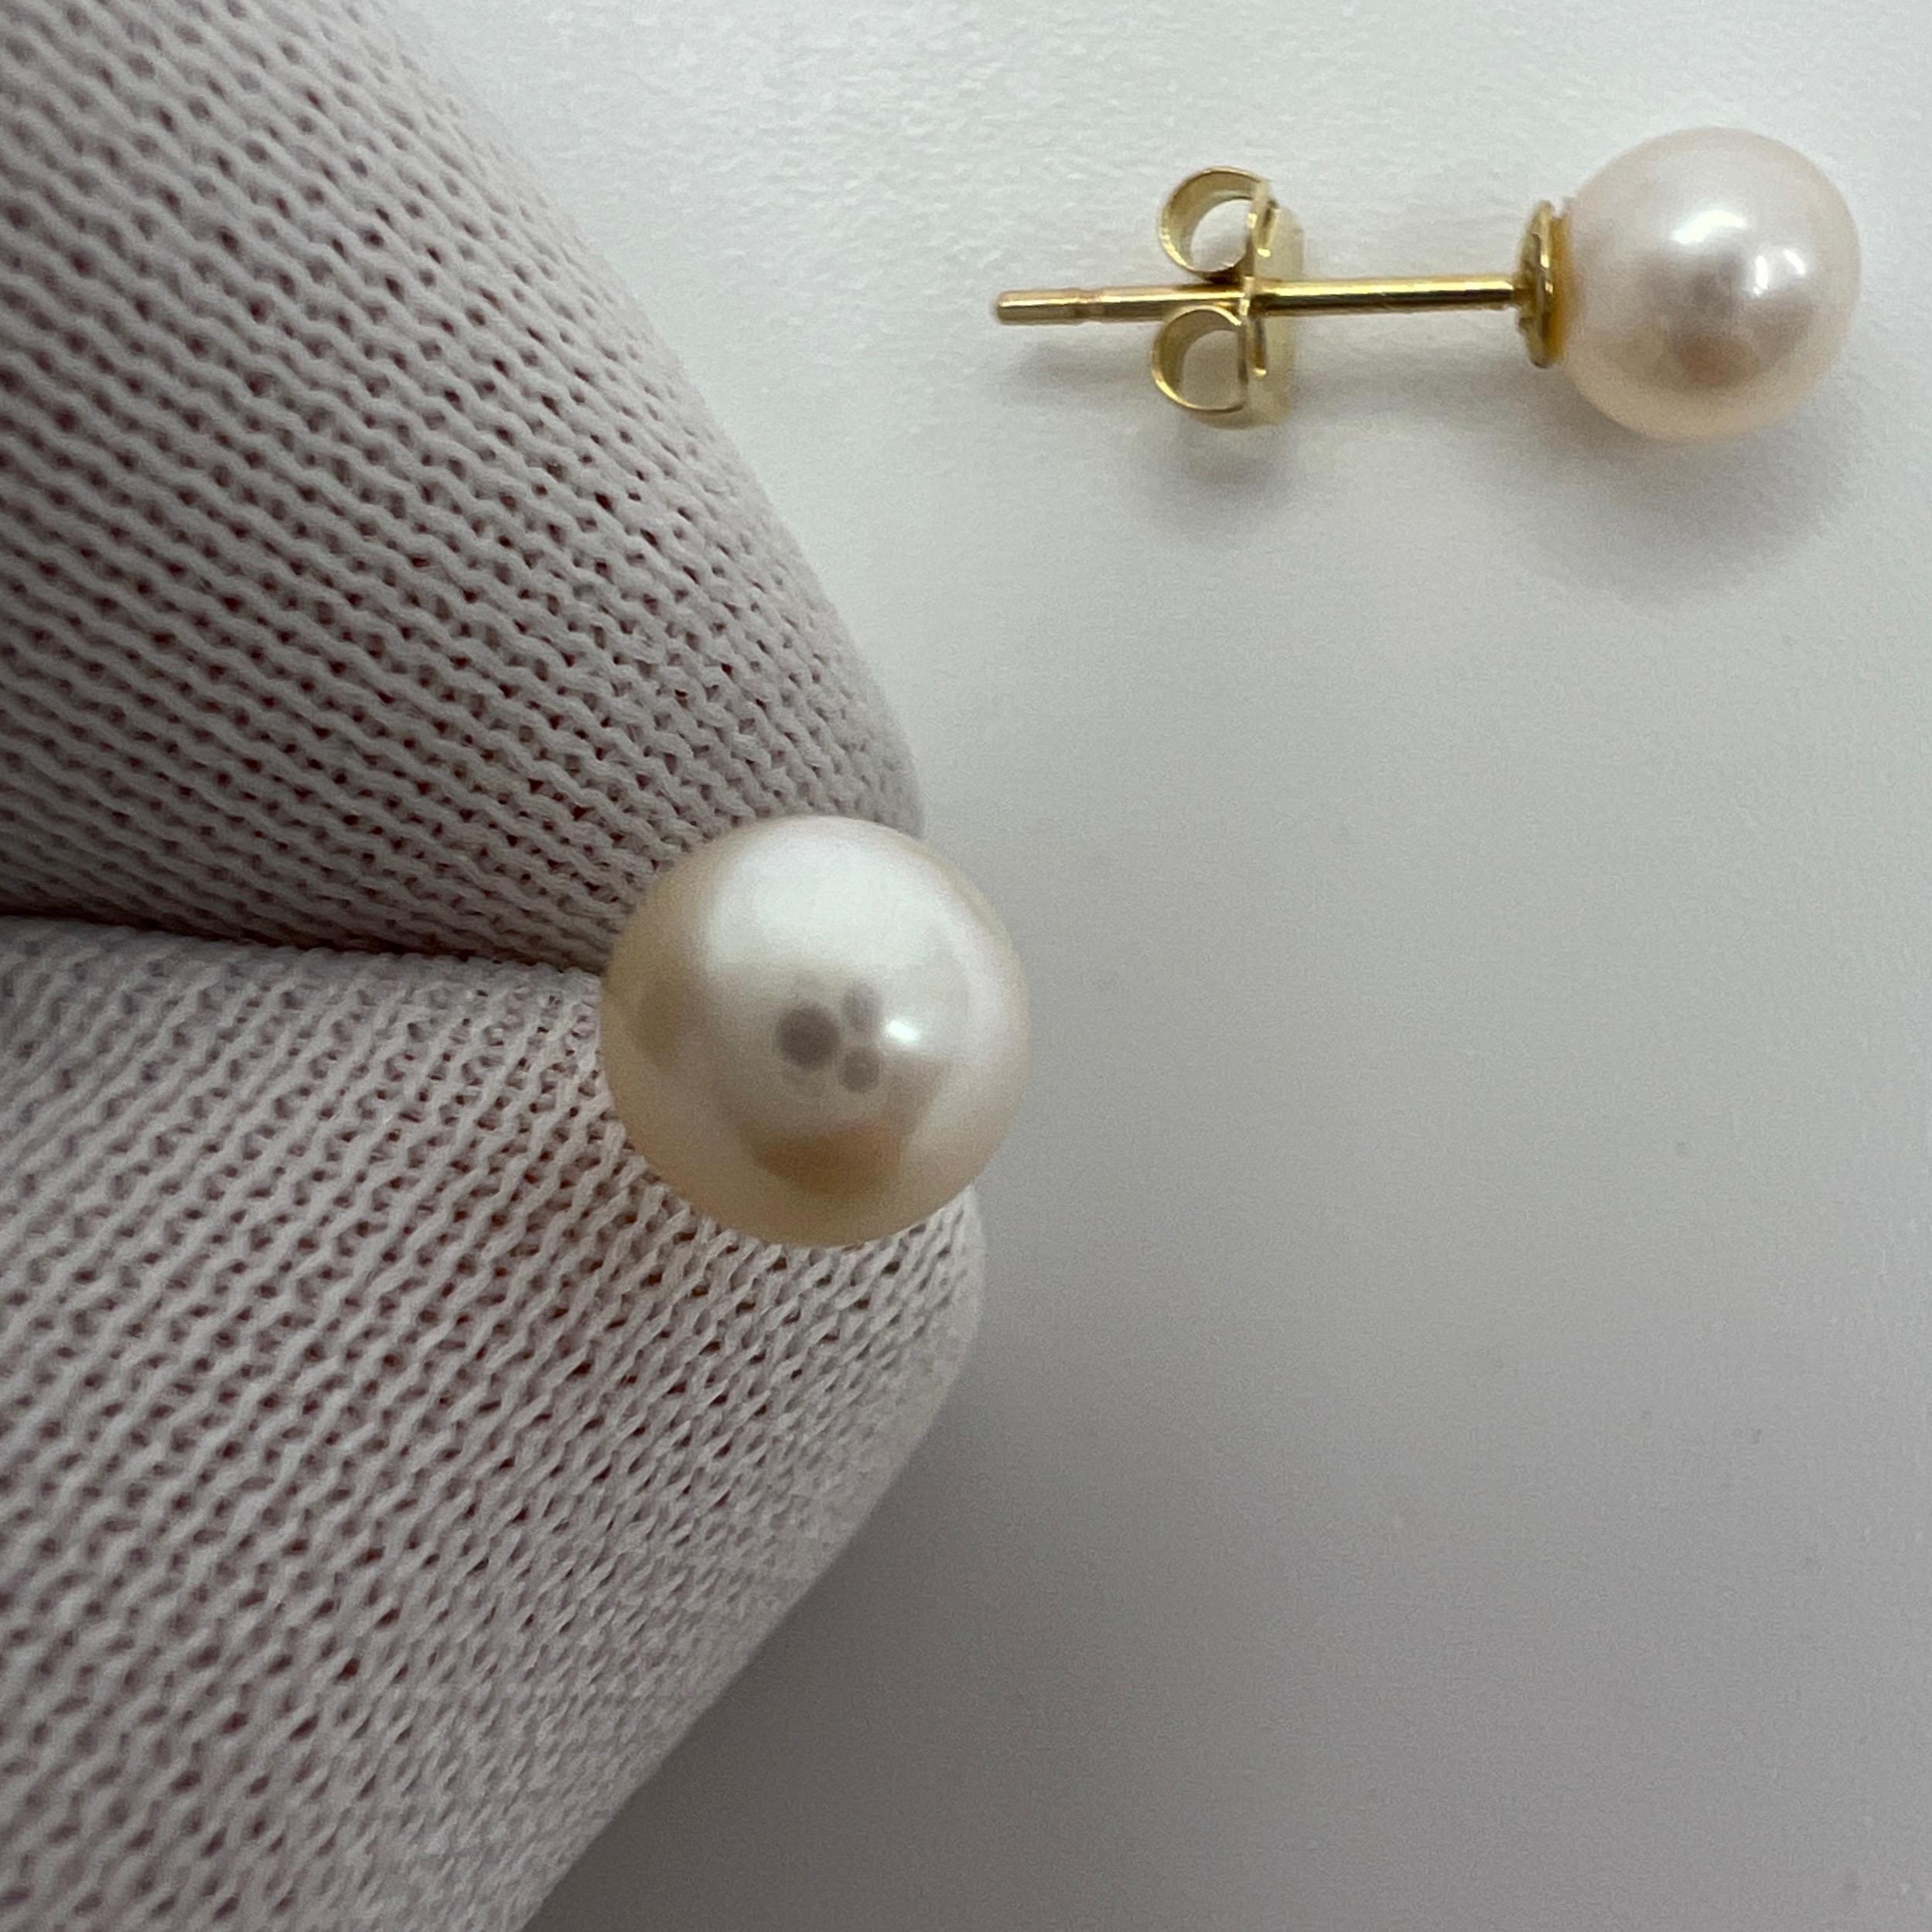 Round Cultured White Pearl 9k Yellow Gold Earring Studs.

Beautiful 5mm matching pair of round pearls with excellent lustre, shape and colour. 

Set in lightweight 9k yellow gold studs with butterfly backs.

Perfect matching pair.

Brand new and